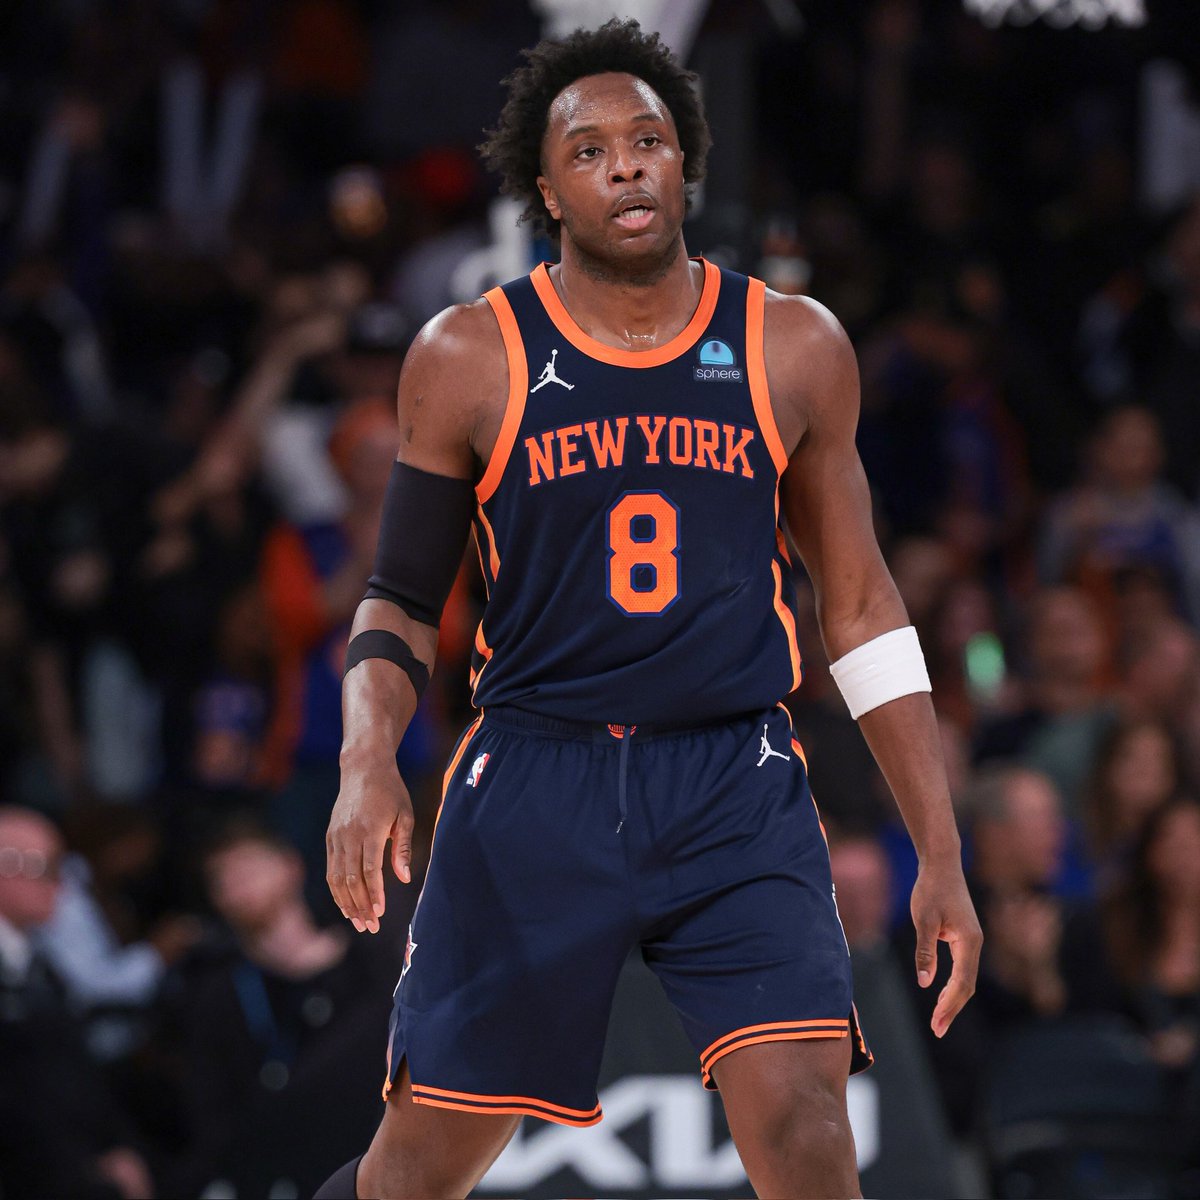 The Knicks have listed OG Anunoby (hamstring) as OUT for Game 3 against the Pacers. Jalen Brunson (foot) is questionable